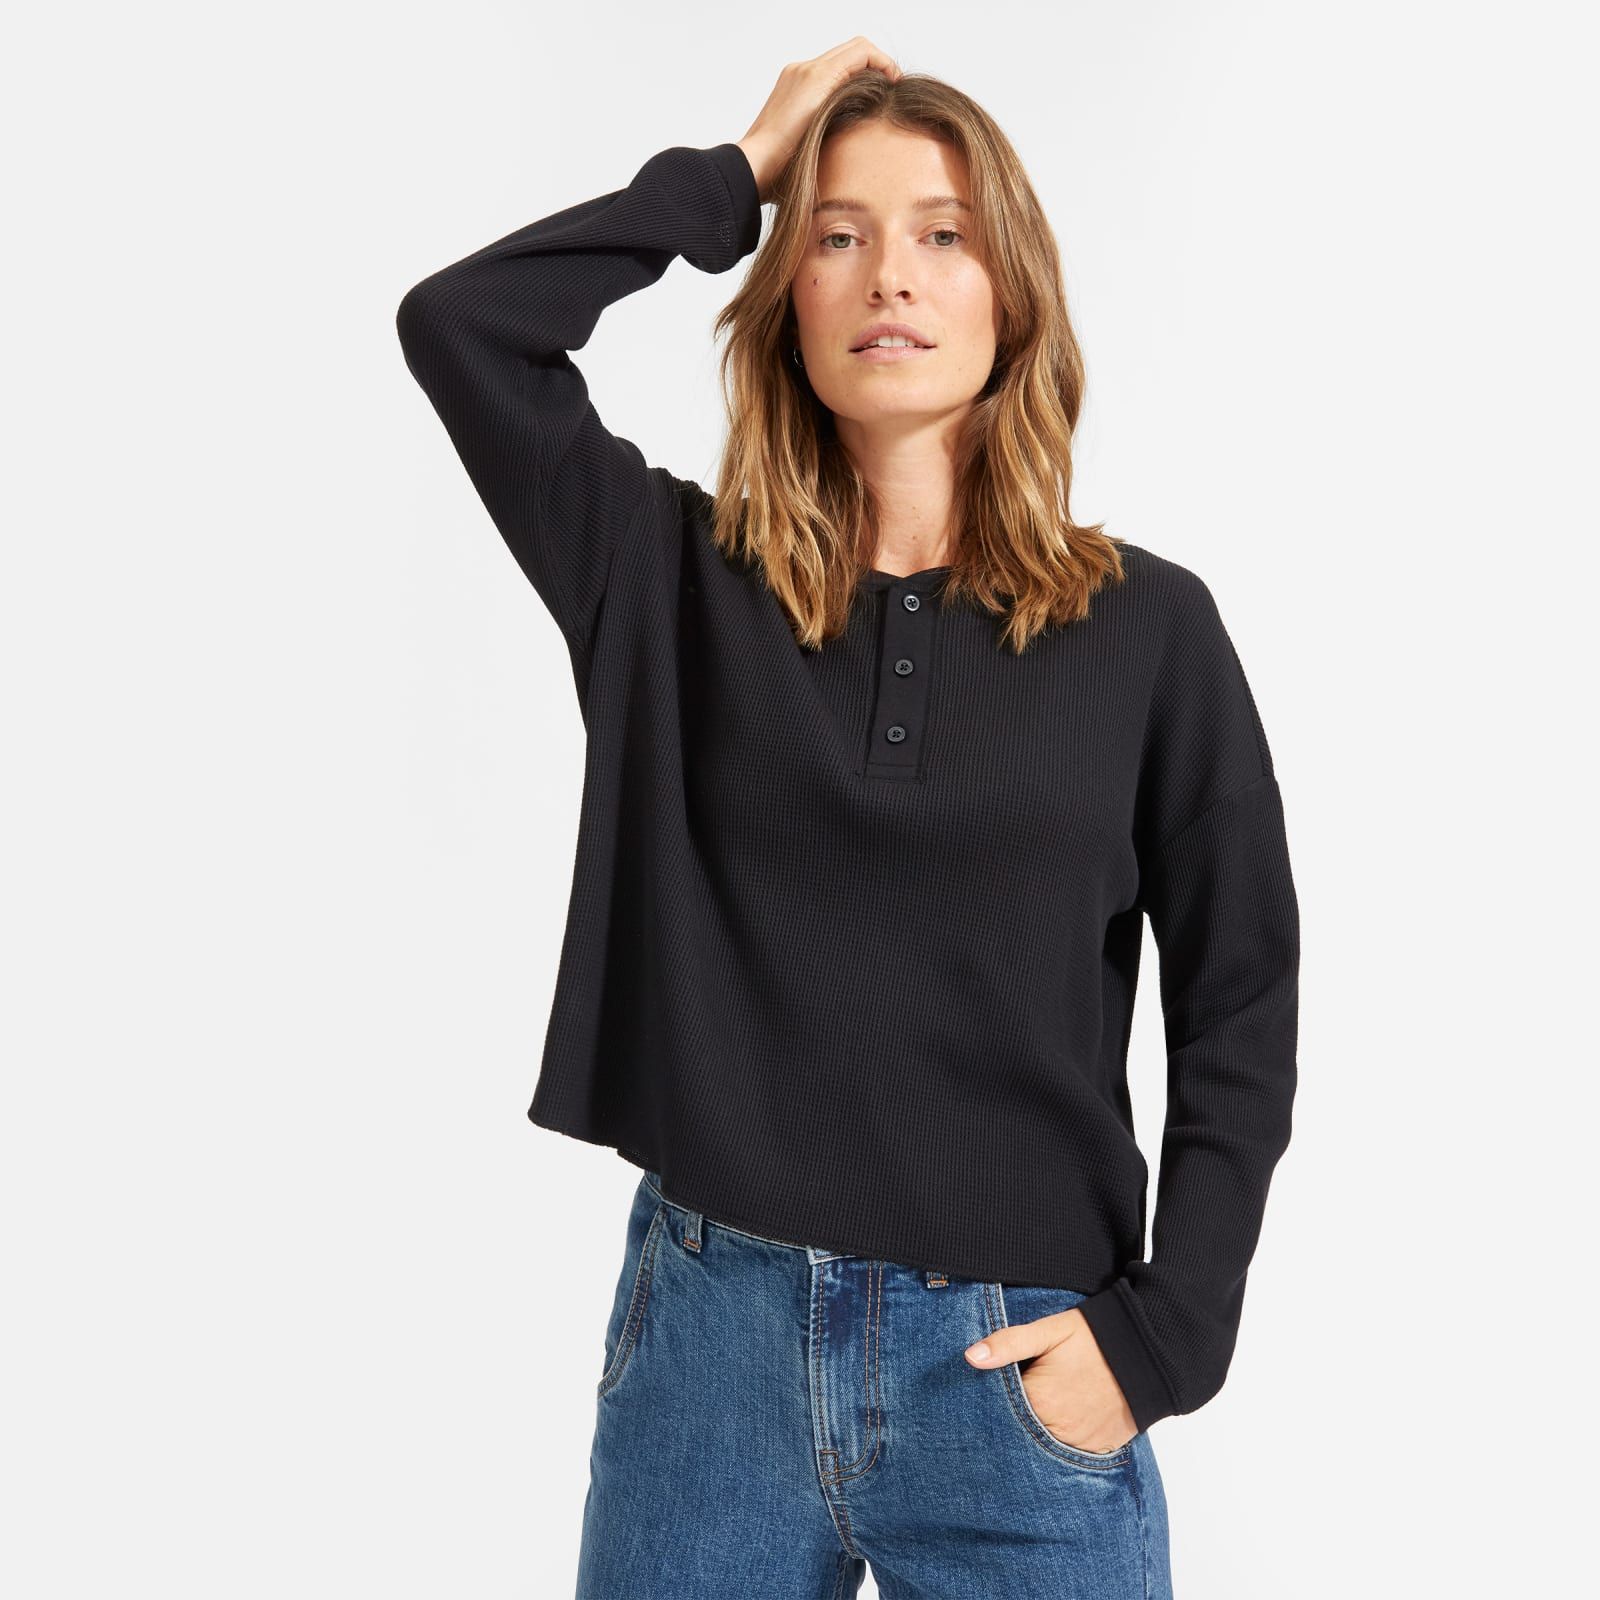 Women's Henley Waffle T-Shirt by Everlane in Washed Black, Size XXS | Everlane